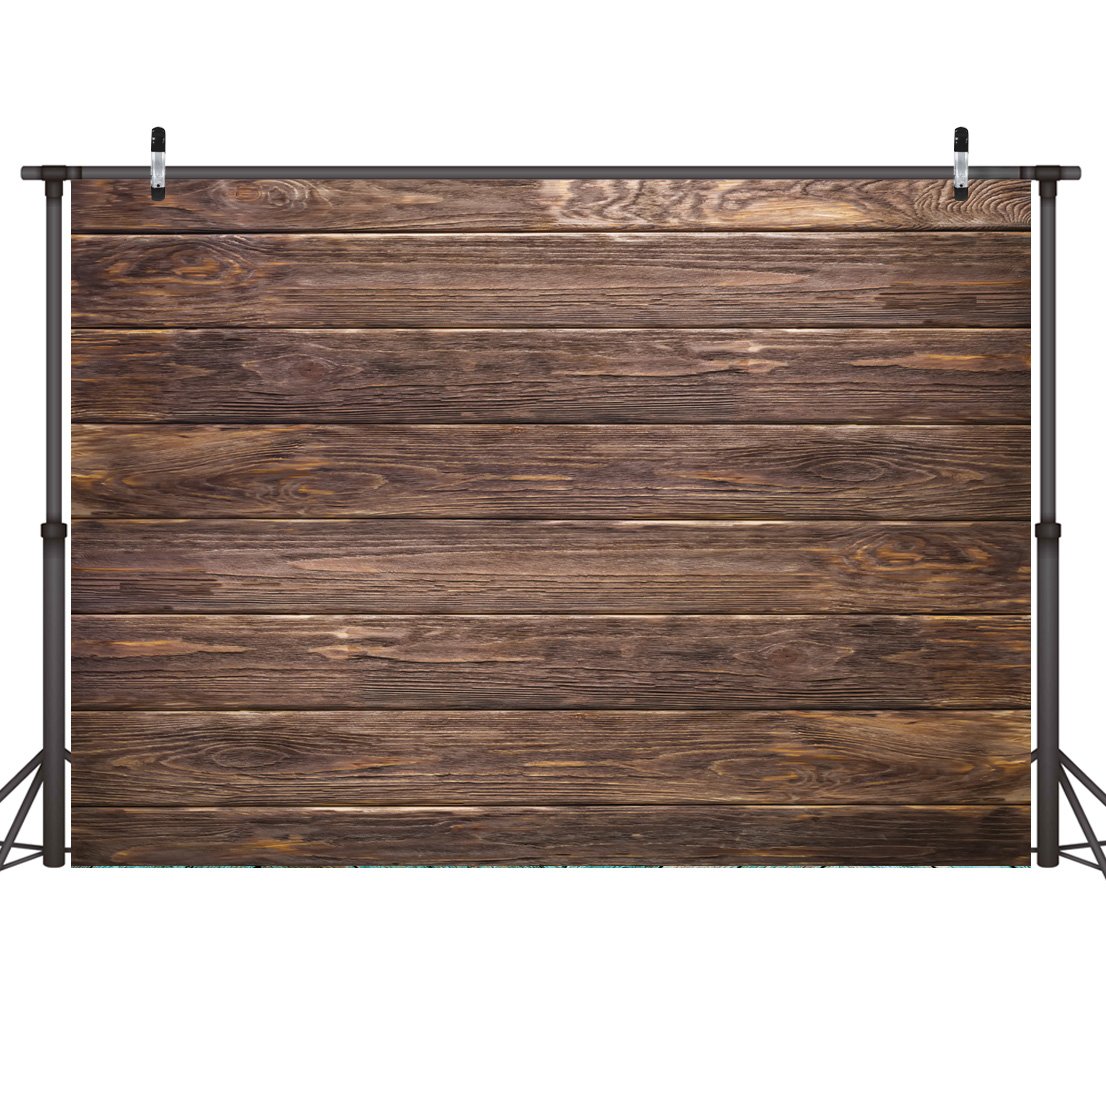 LYWYGG 10x8ft Thin Vinyl Brown Wood Backdrop Photographers Retro Wood Wall Background Cloth Seamless CP-19-1008